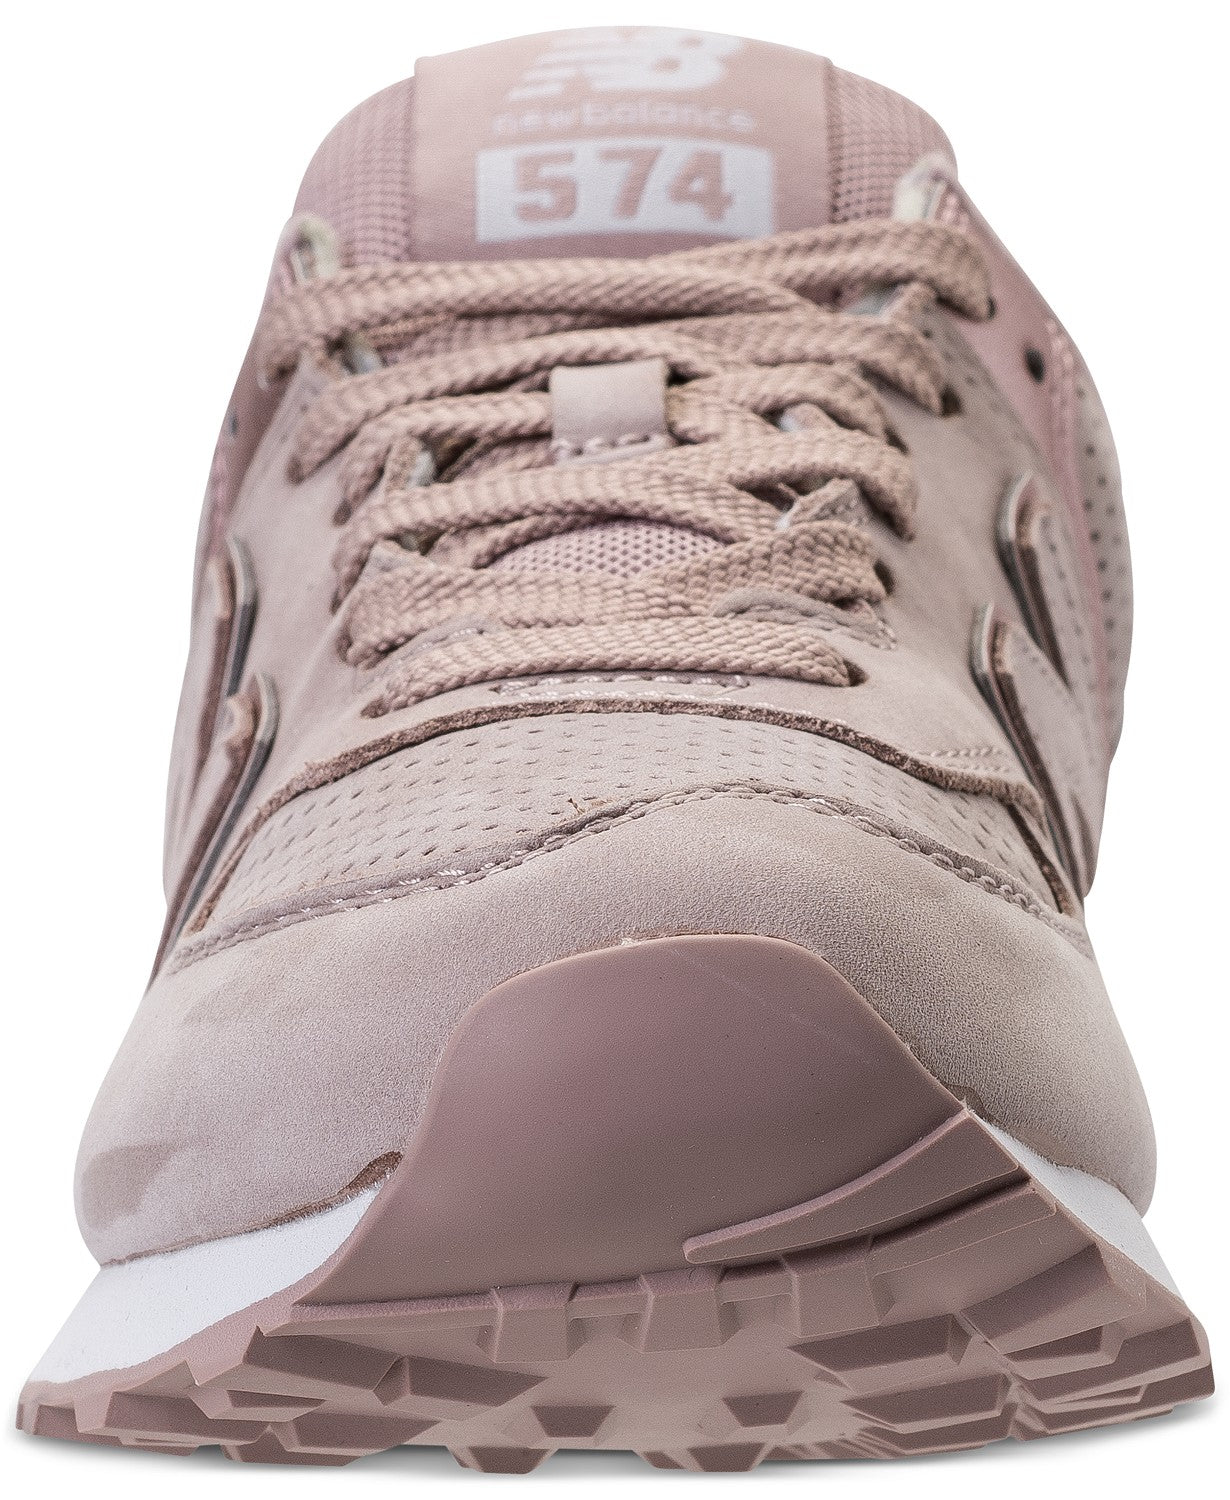 women's 574 rose gold casual sneakers